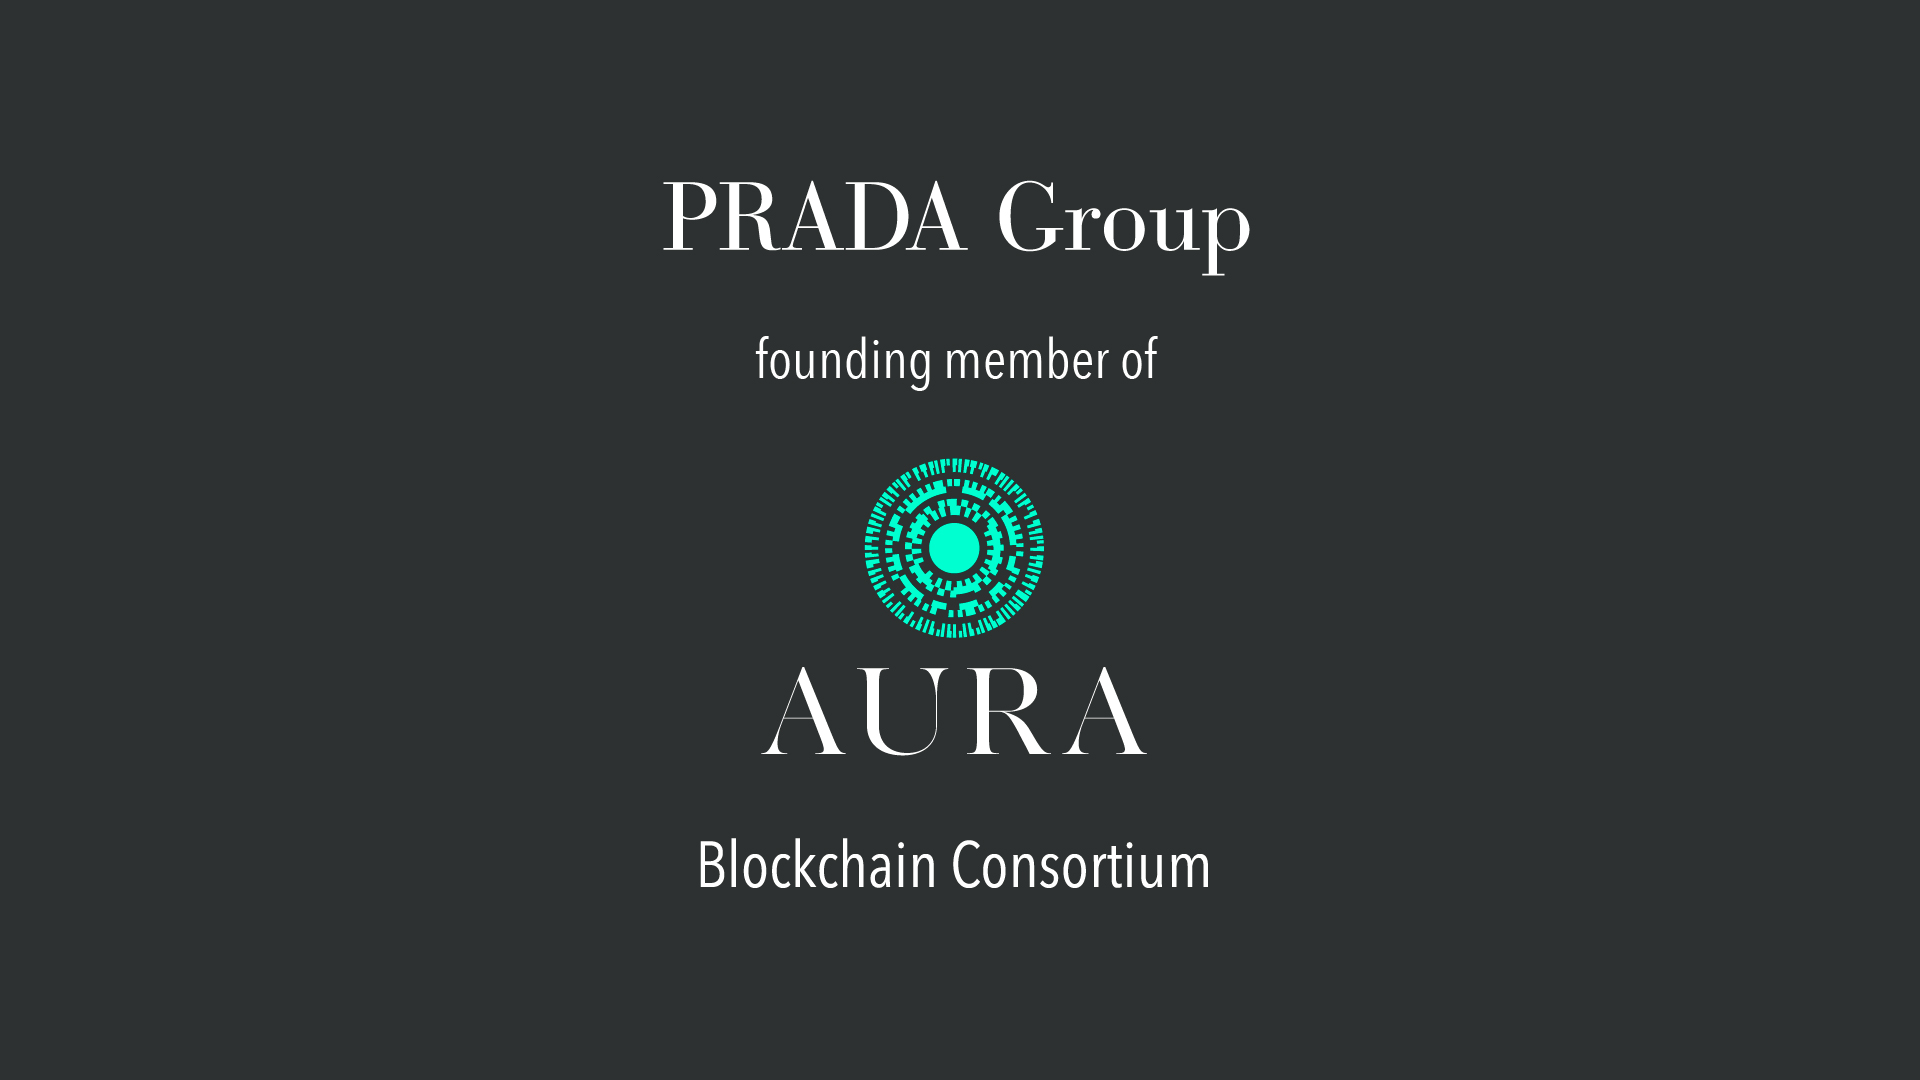 Prada's NFT is made in collaboration with AURA, a recent partner of Prada